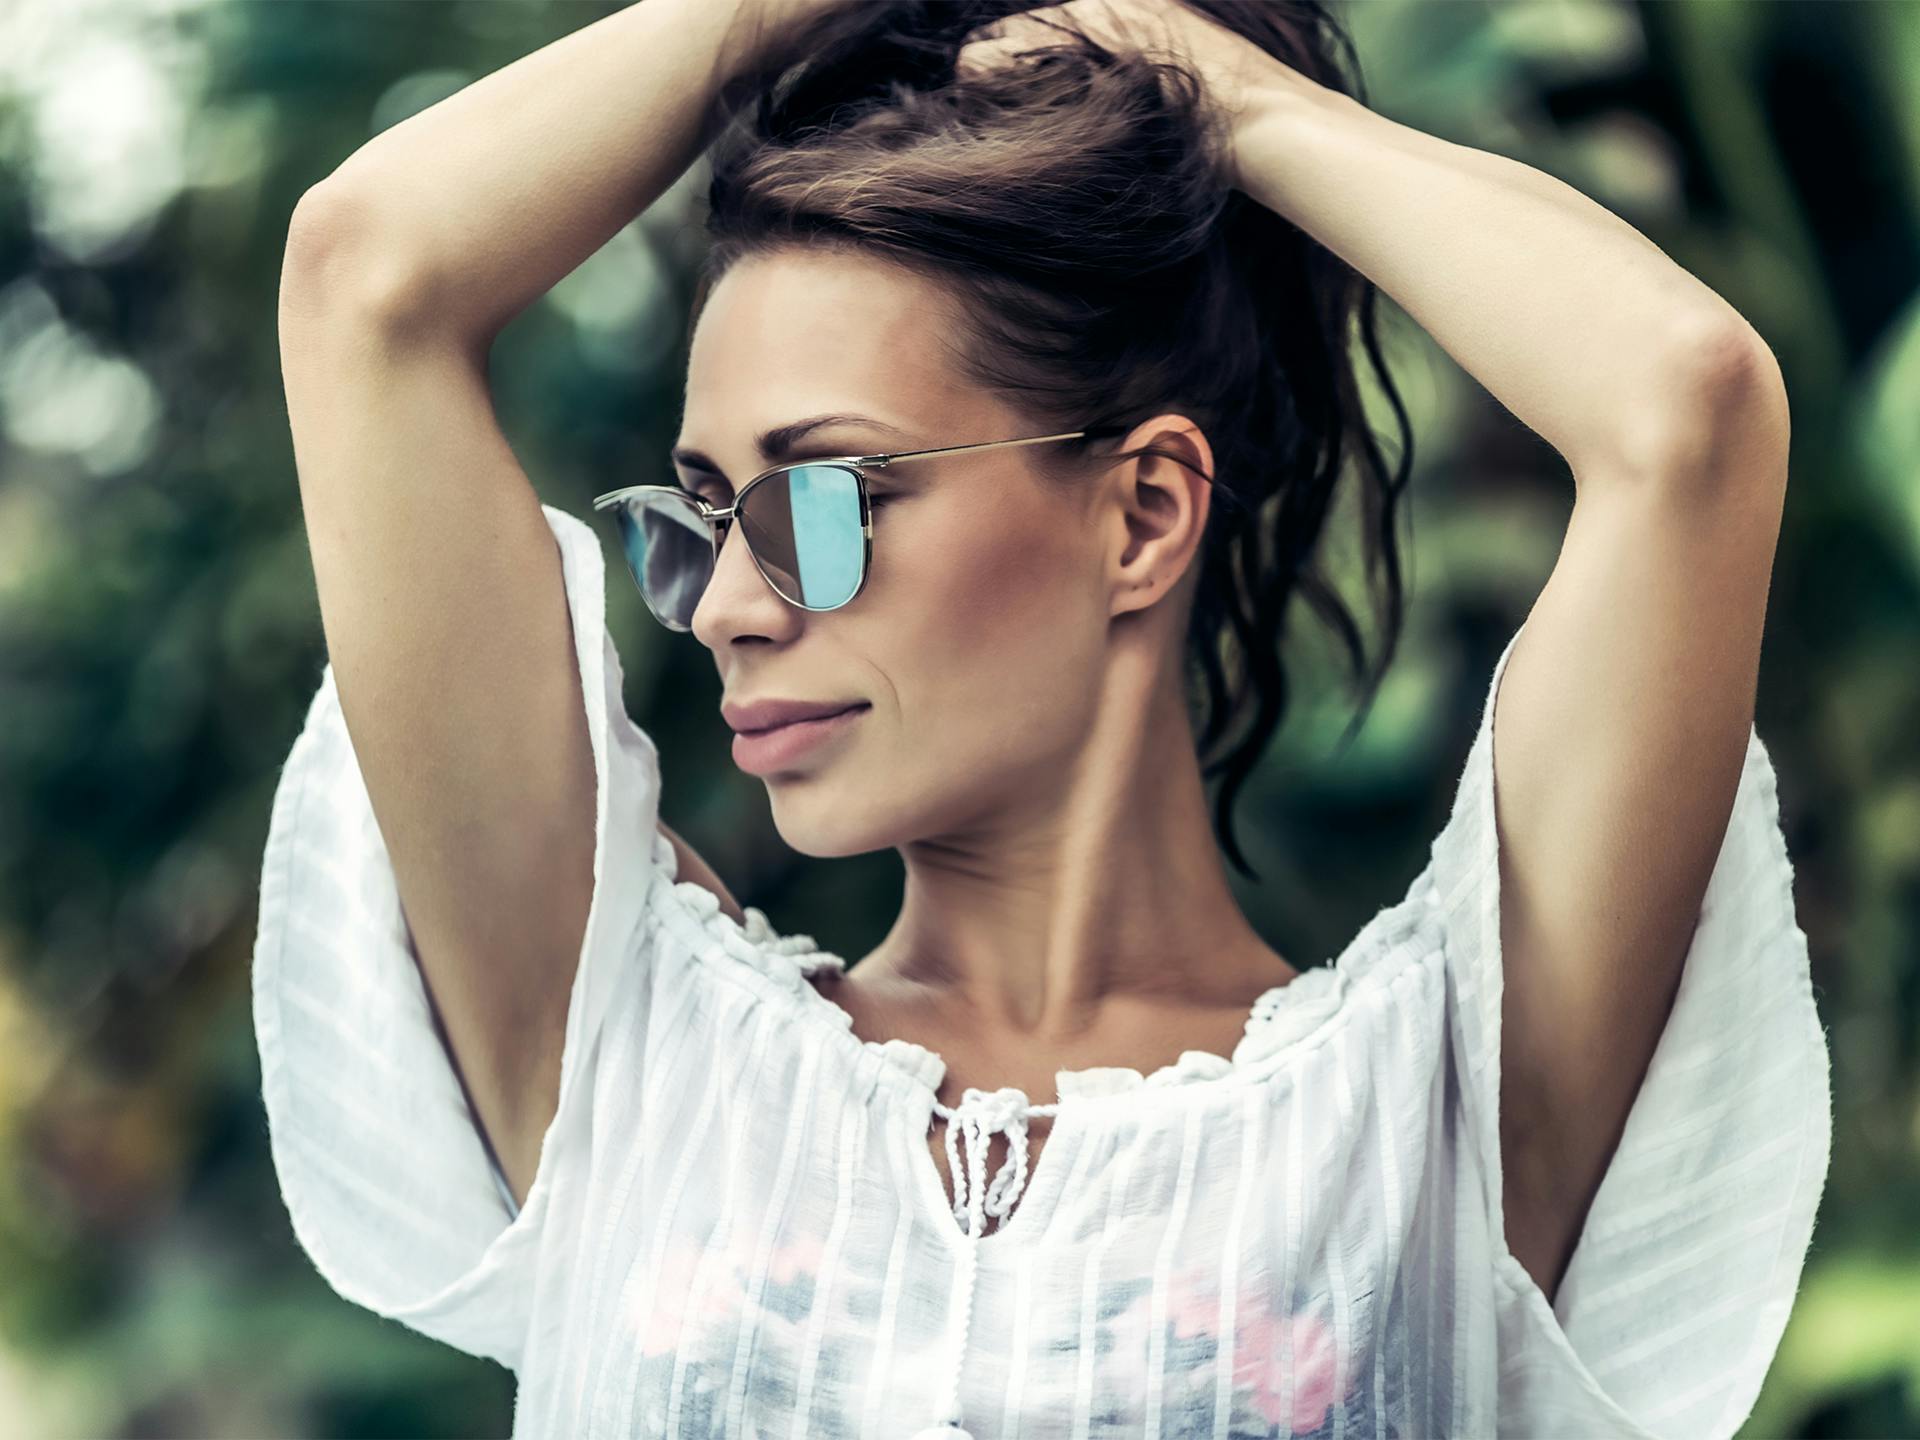 Woman in sunglasses wearing white blouse.